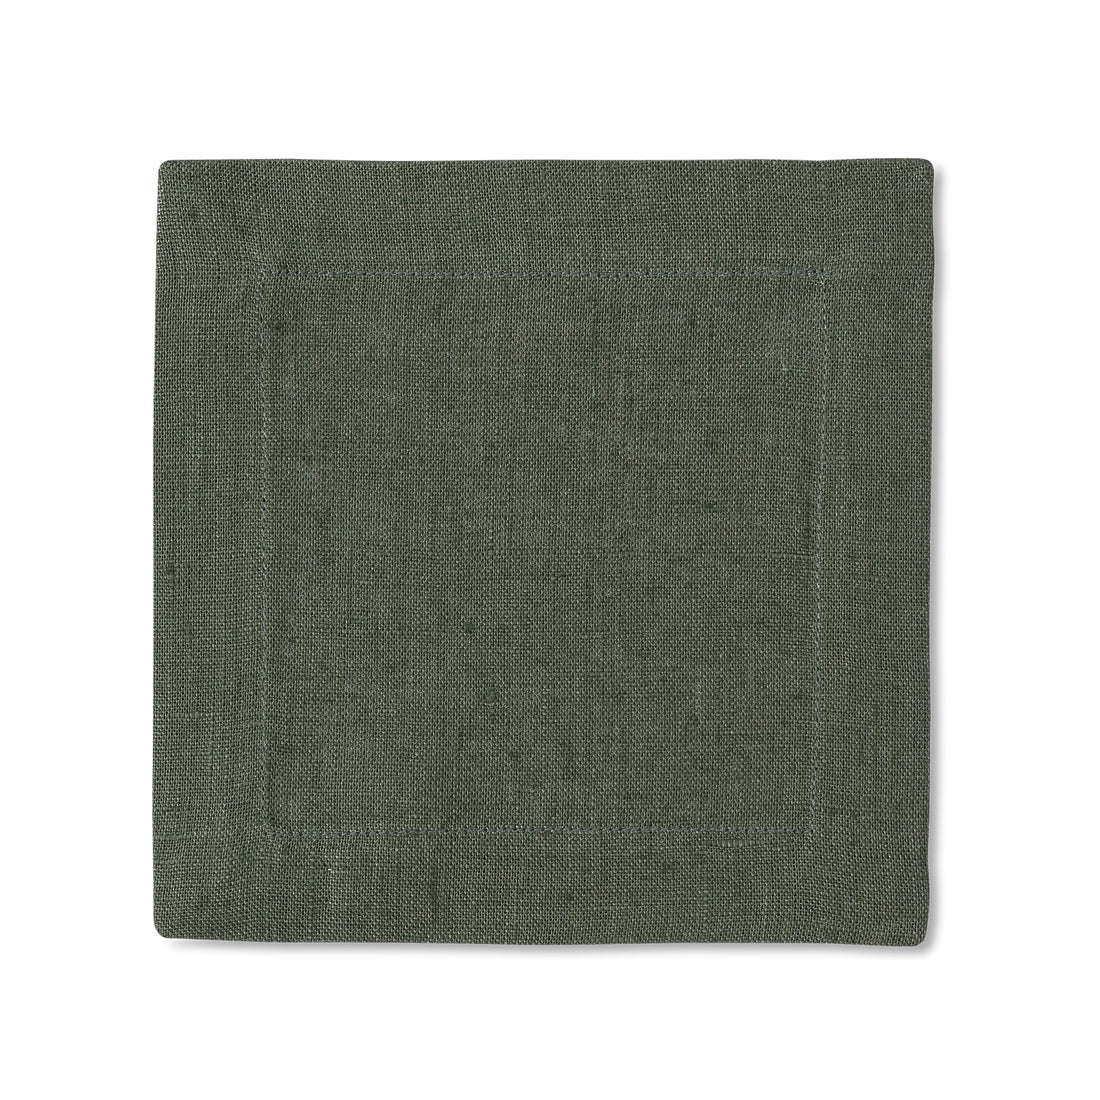 Autumnal dark green Henry Handwork linen cocktail napkin folded into a square on a white background.